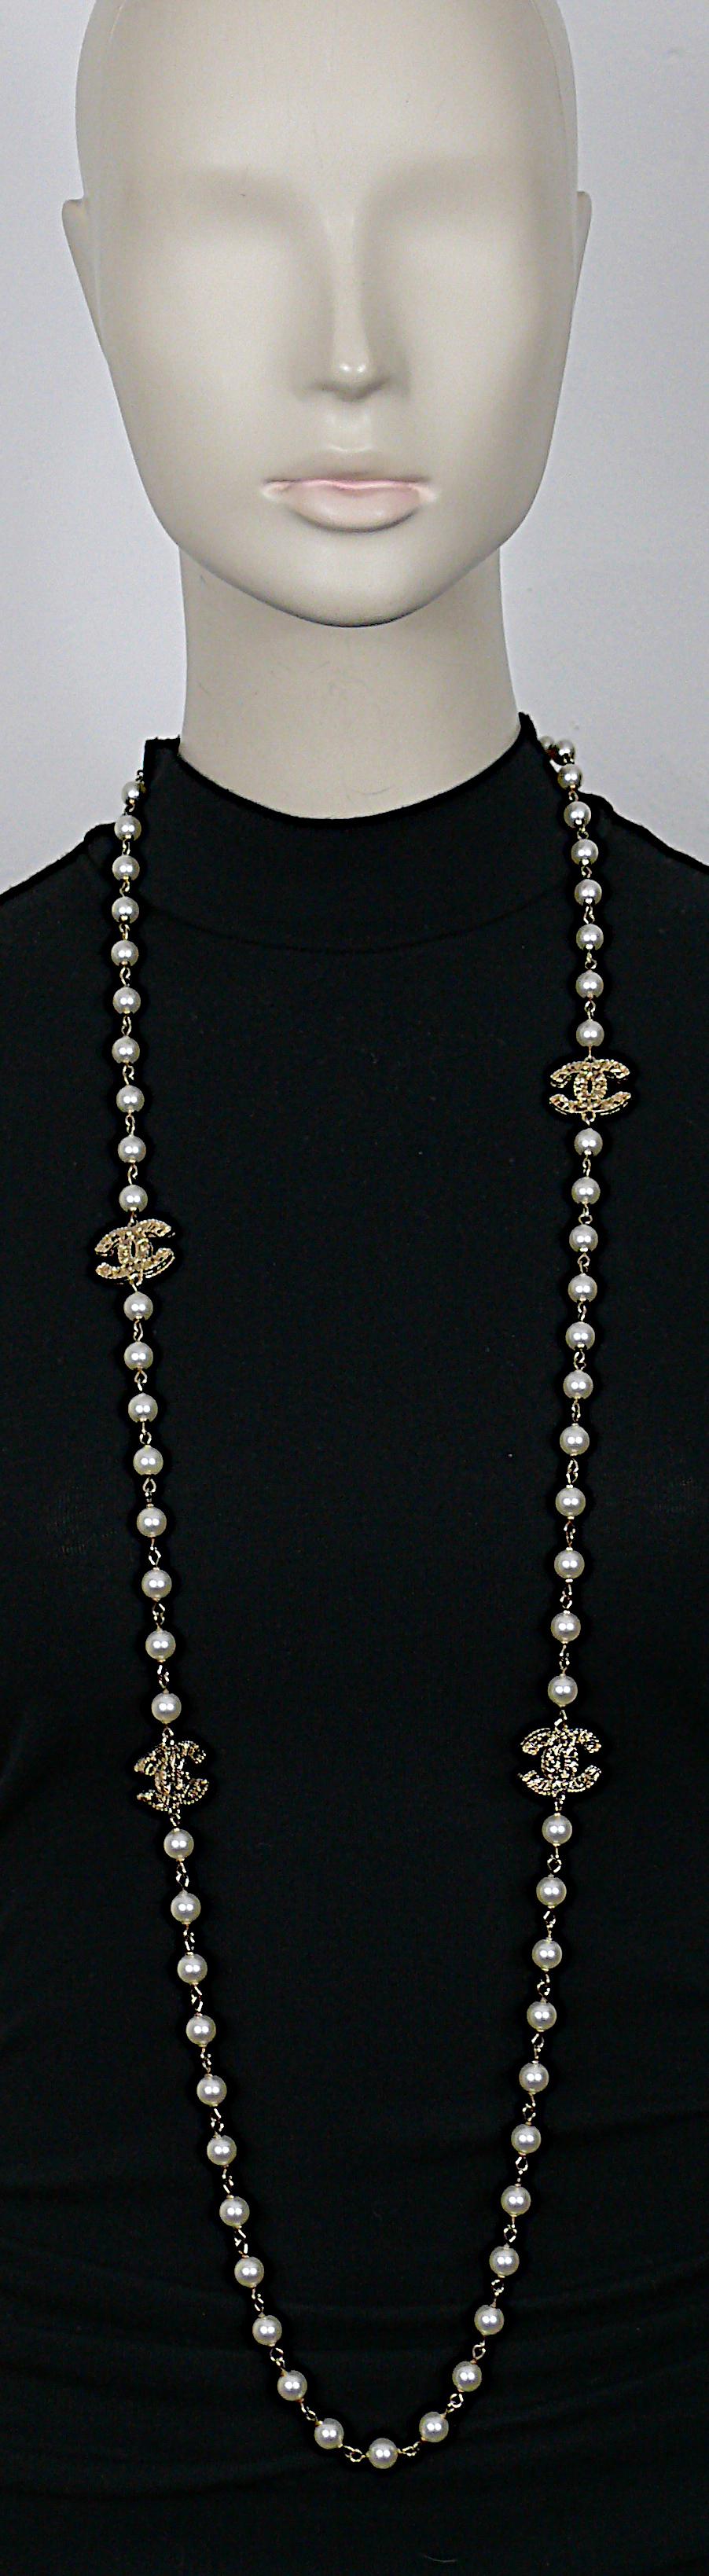 CHANEL by KARL LAGERFELD gold tone faux pearl necklace featuring 4 CC logos.

From the Fall 2008 Collection.

Lobster clasp closure.

Embossed CHANEL 08 A Made in France.

Indicative measurements : length approx. 117 cm (46.06 inches) / CC logo